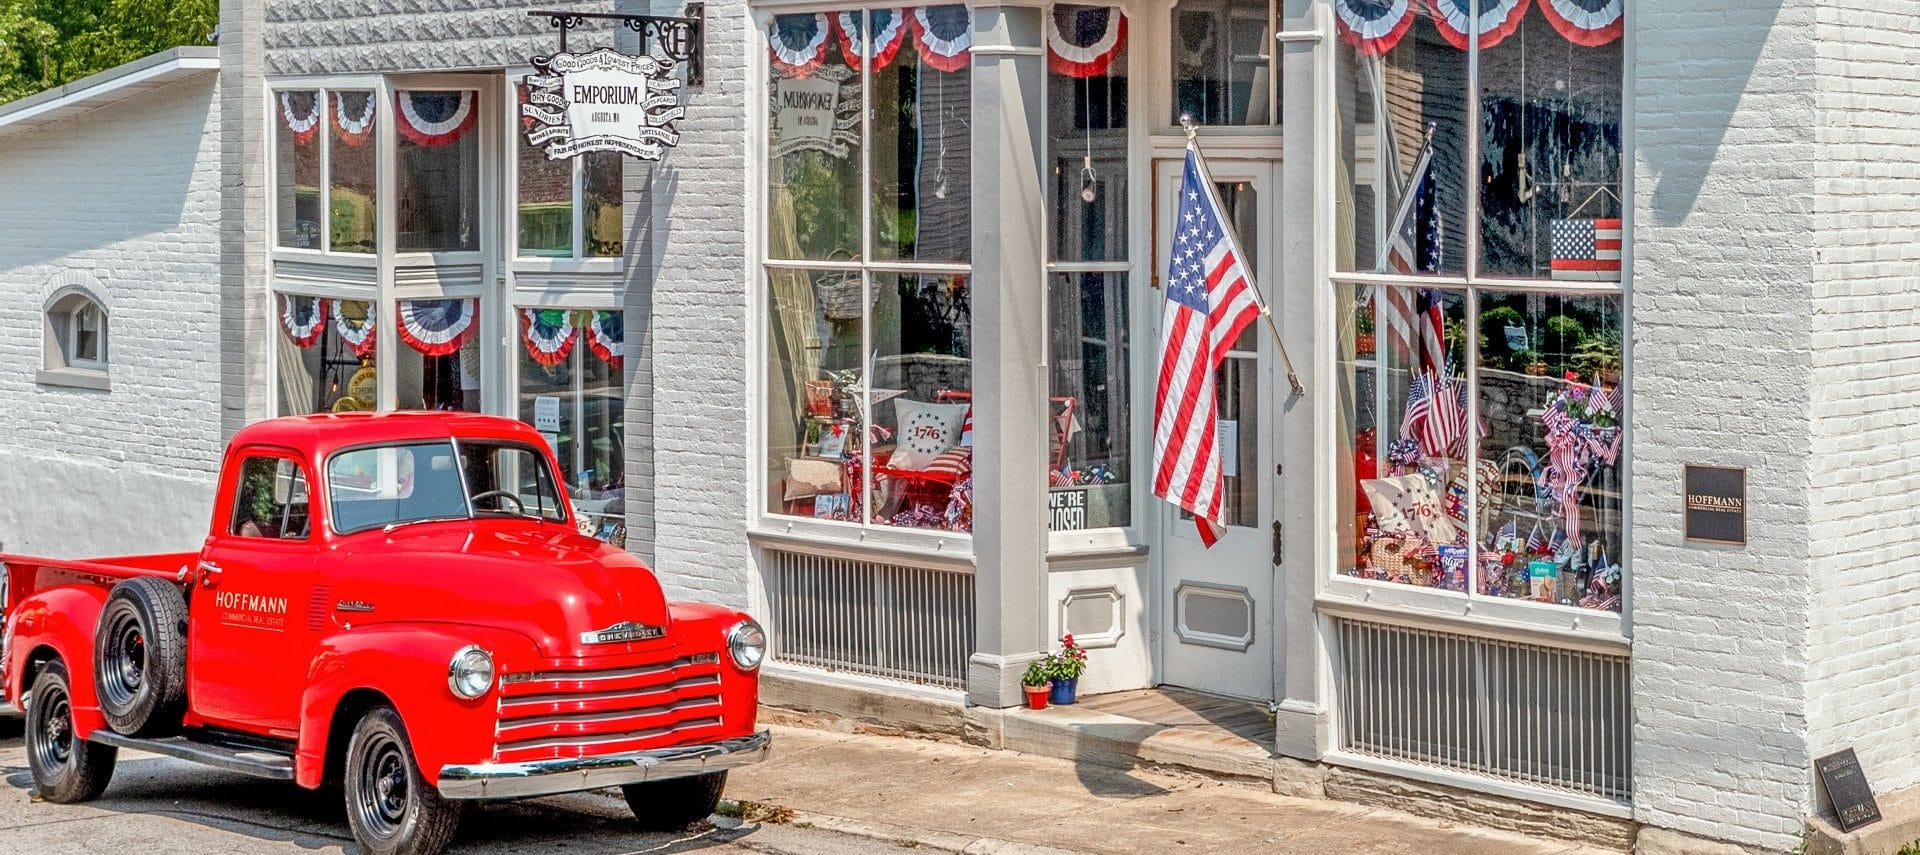 Bright red vintage pick up truck in front of a store with windows decked in Americana decor